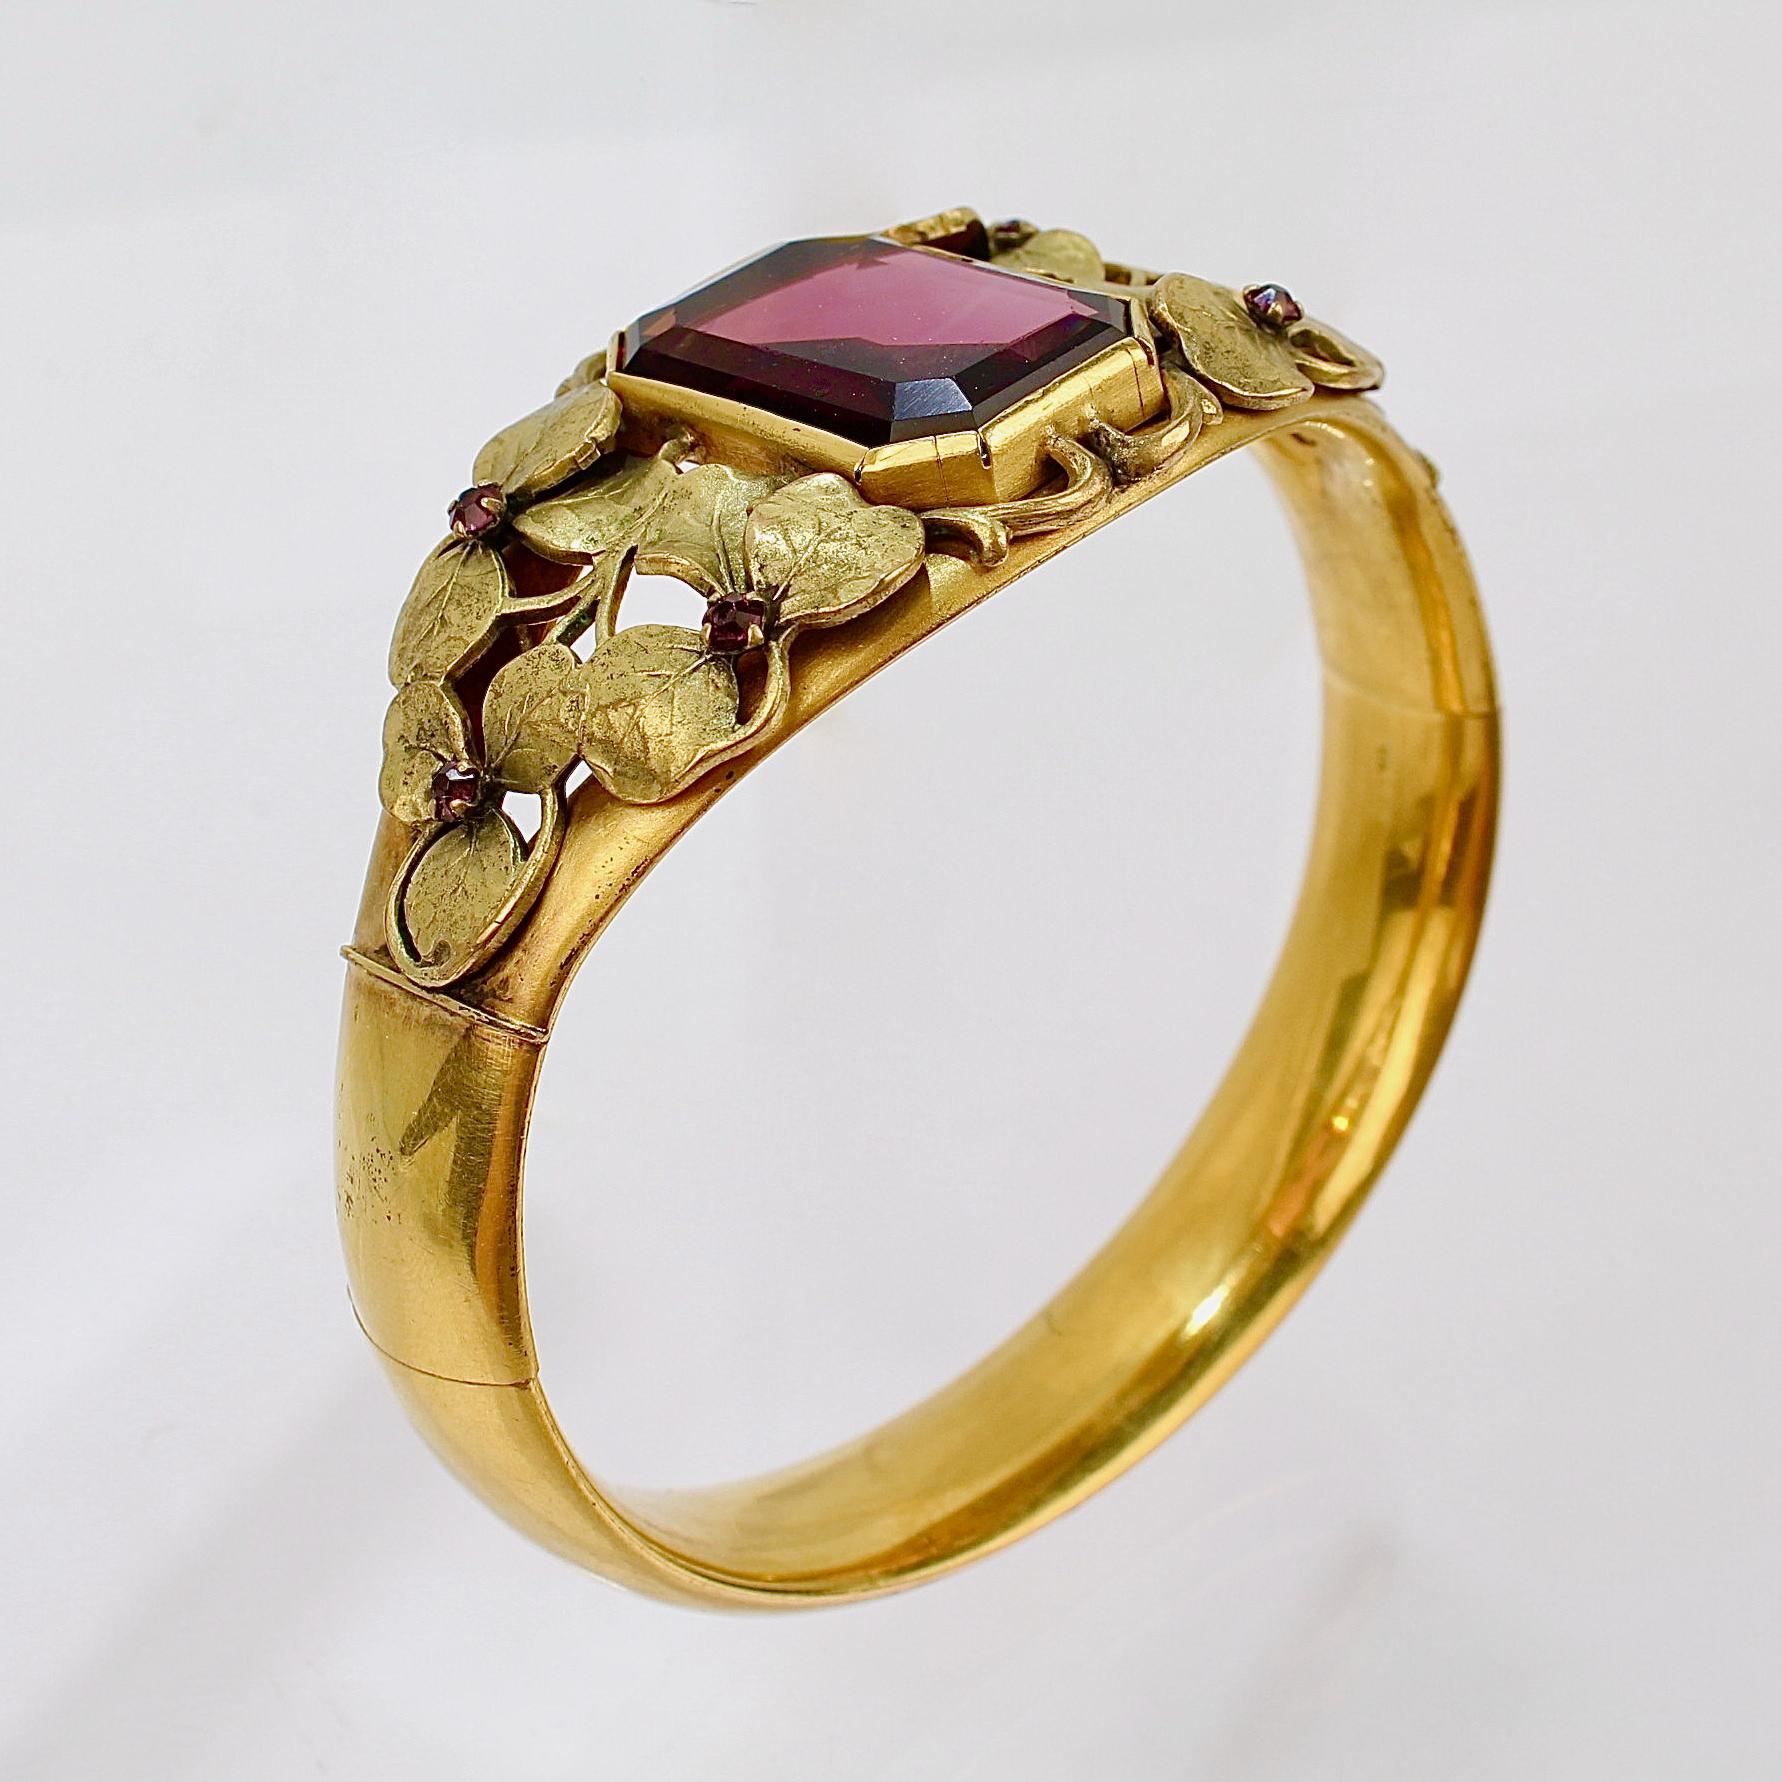 A very fine Victorian gold filled bangle bracelet.

Made by the W. & S. Blackinton Co. of Meriden, CT in the late 19th century.

The center is bezel set with an emerald-cut purple glass stone and surrounded with gold filled leaf work.  

The veined